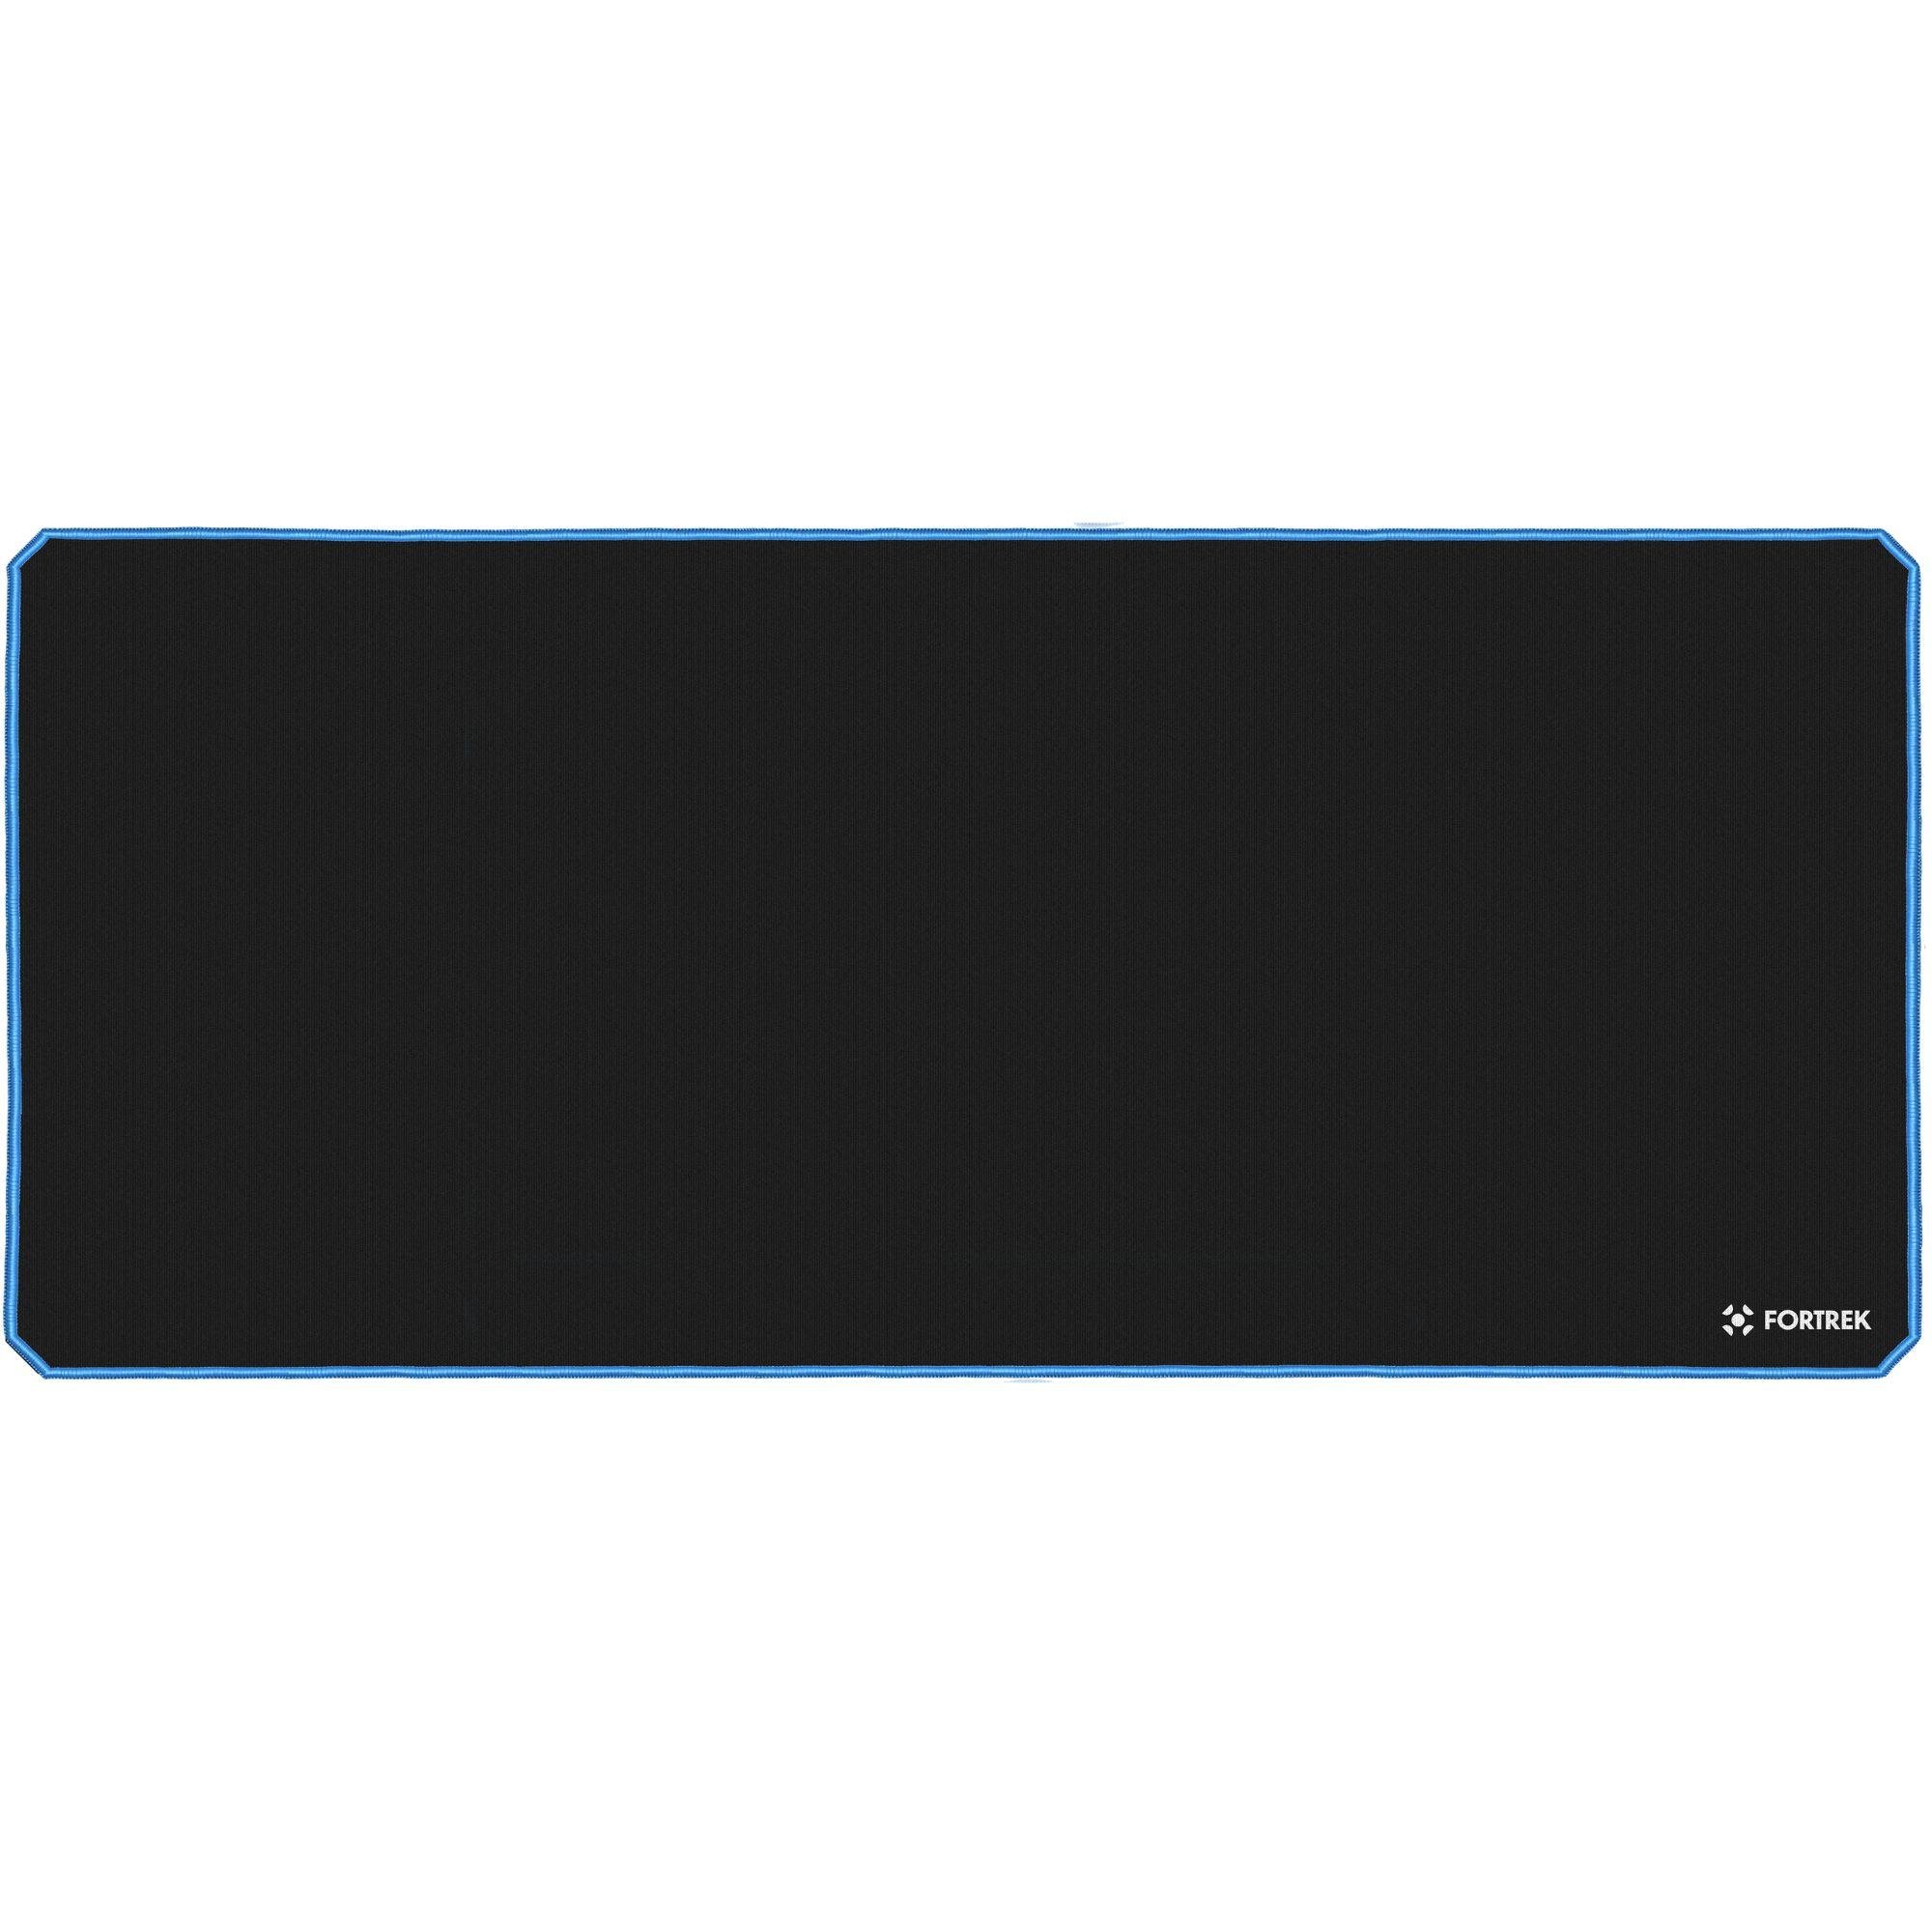 Mouse Pad Gamer Fortrek Speed MPG104 (900x400mm) Azul